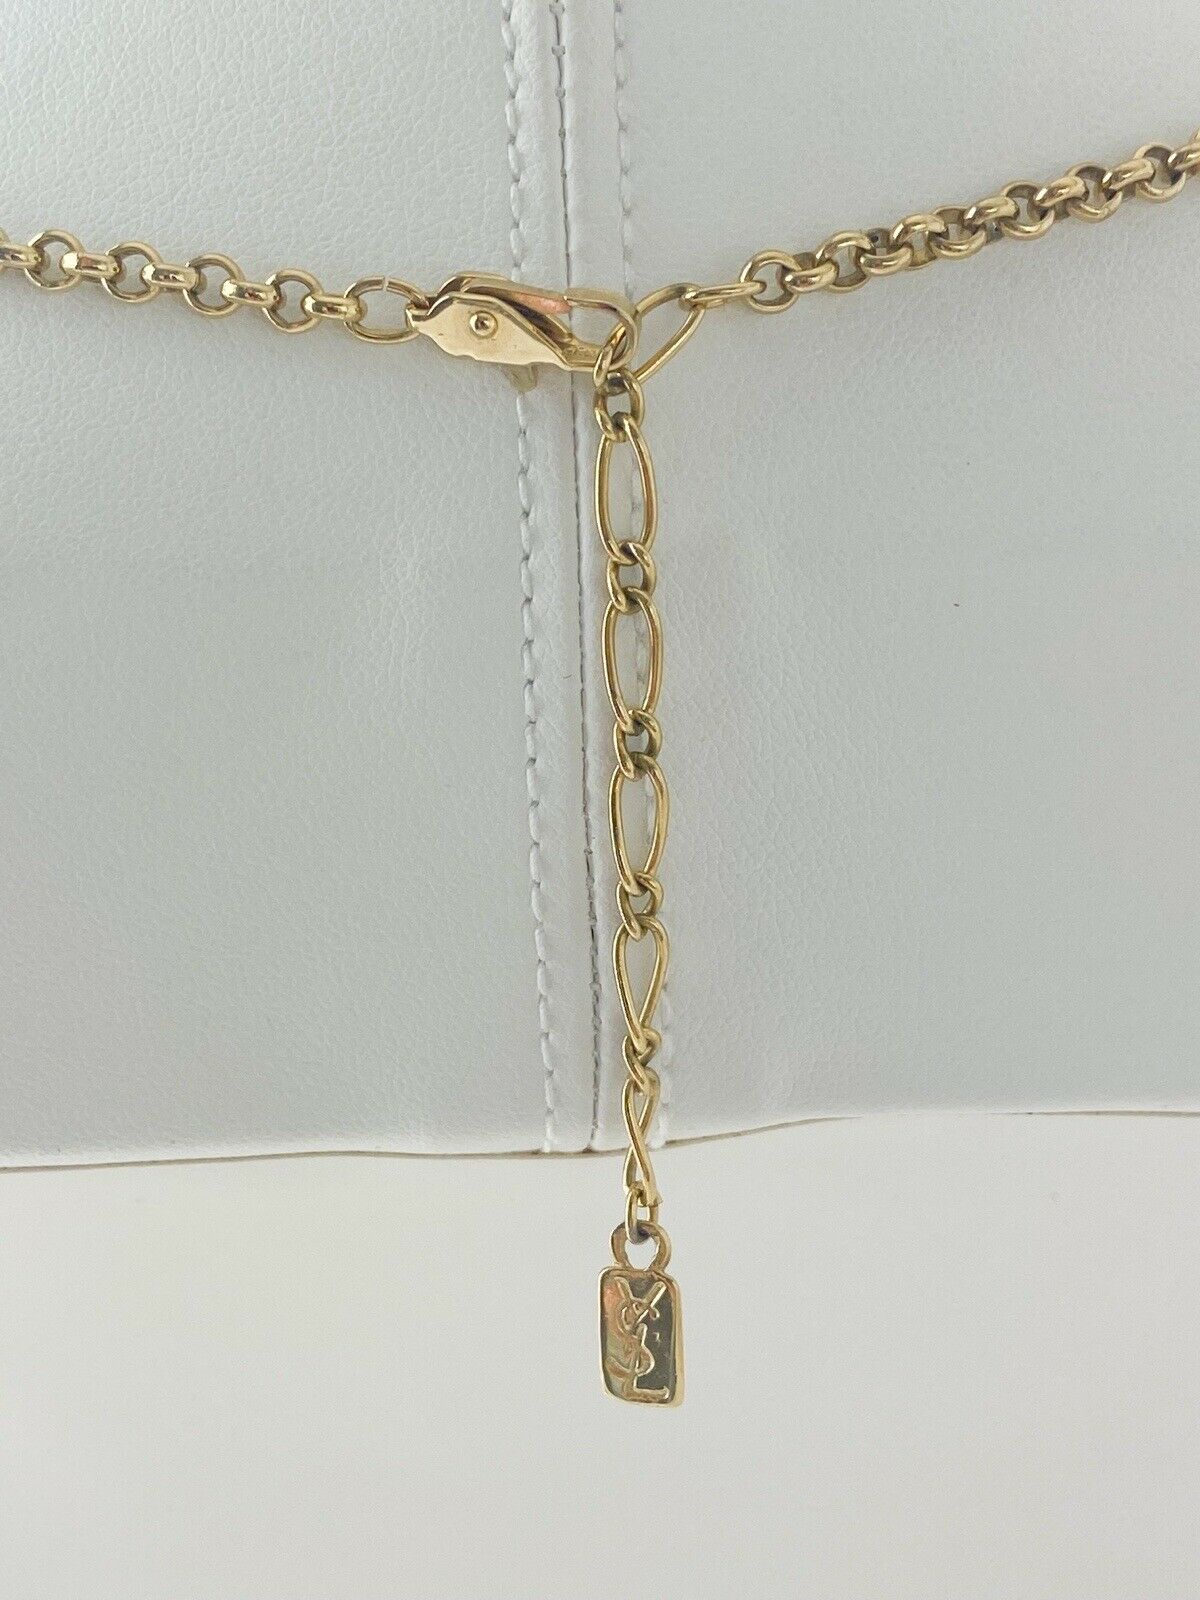 【SOLD OUT】YSL Yves Saint Laurent Vintage Gold Tone Flower Necklace Rhinestones